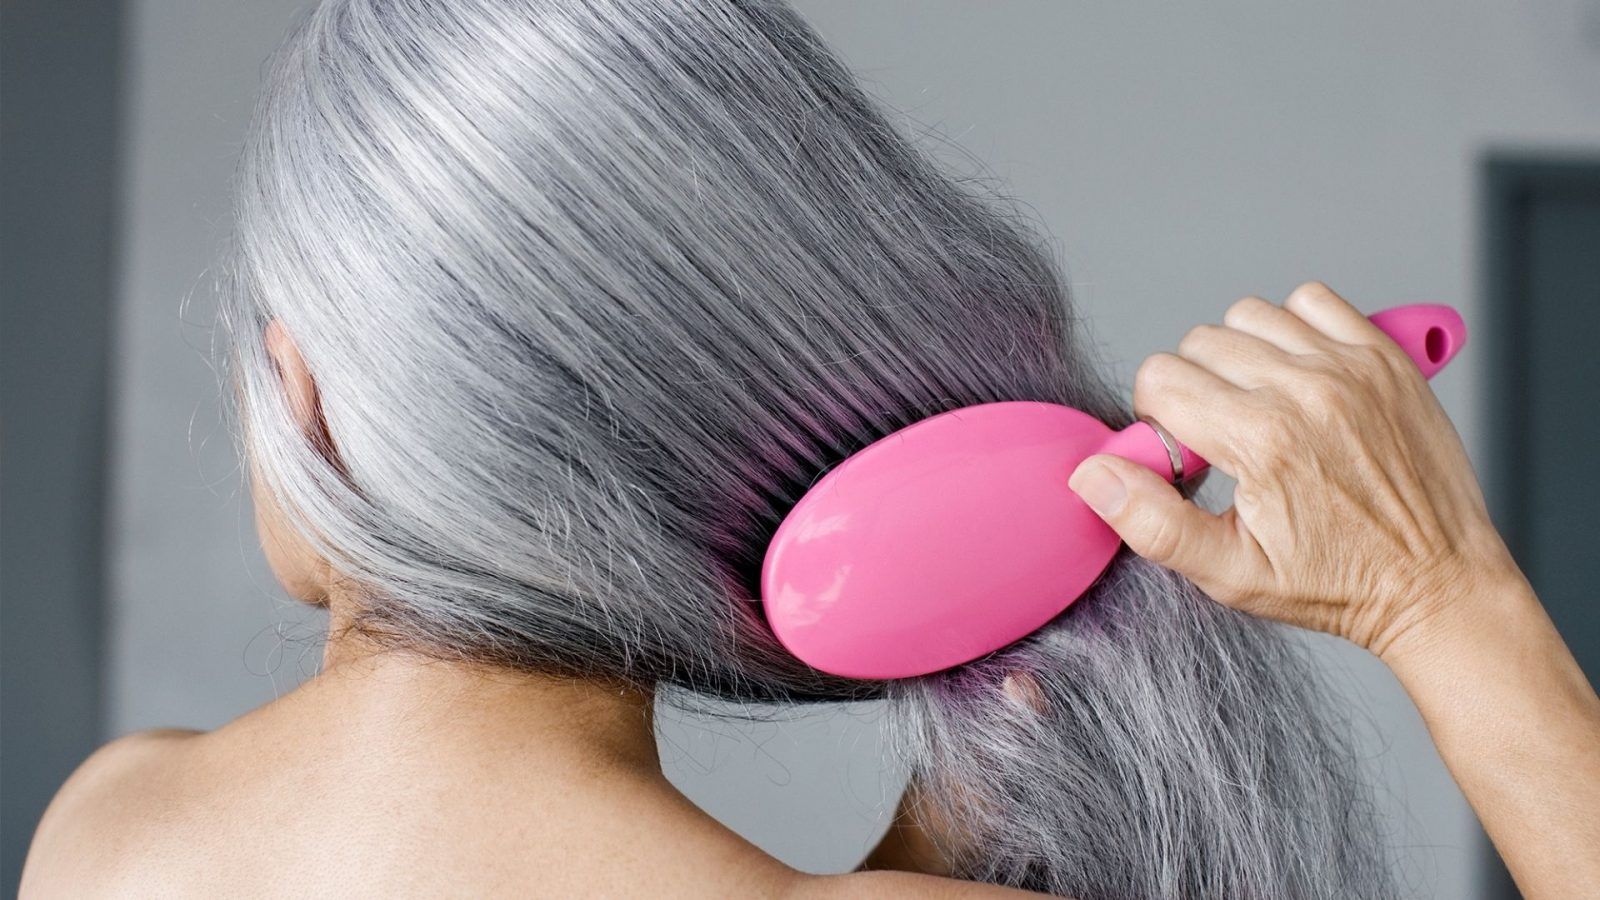 How to brush your hair the right way, according to hairstylists